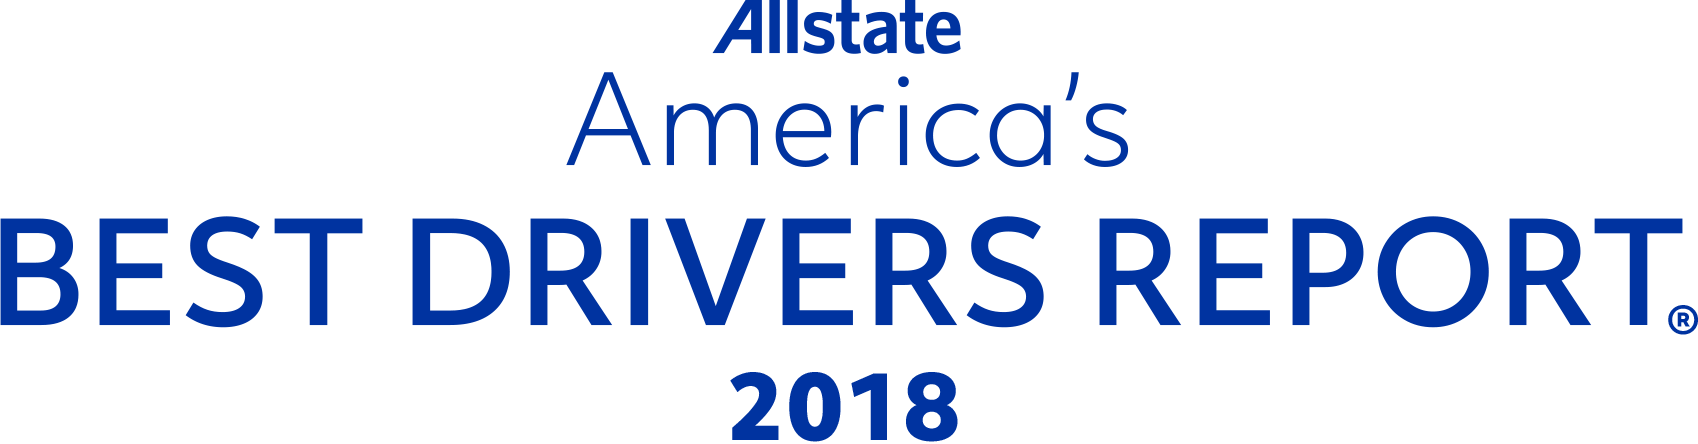 Allstate Old Logo - Allstate America's Best Drivers Report